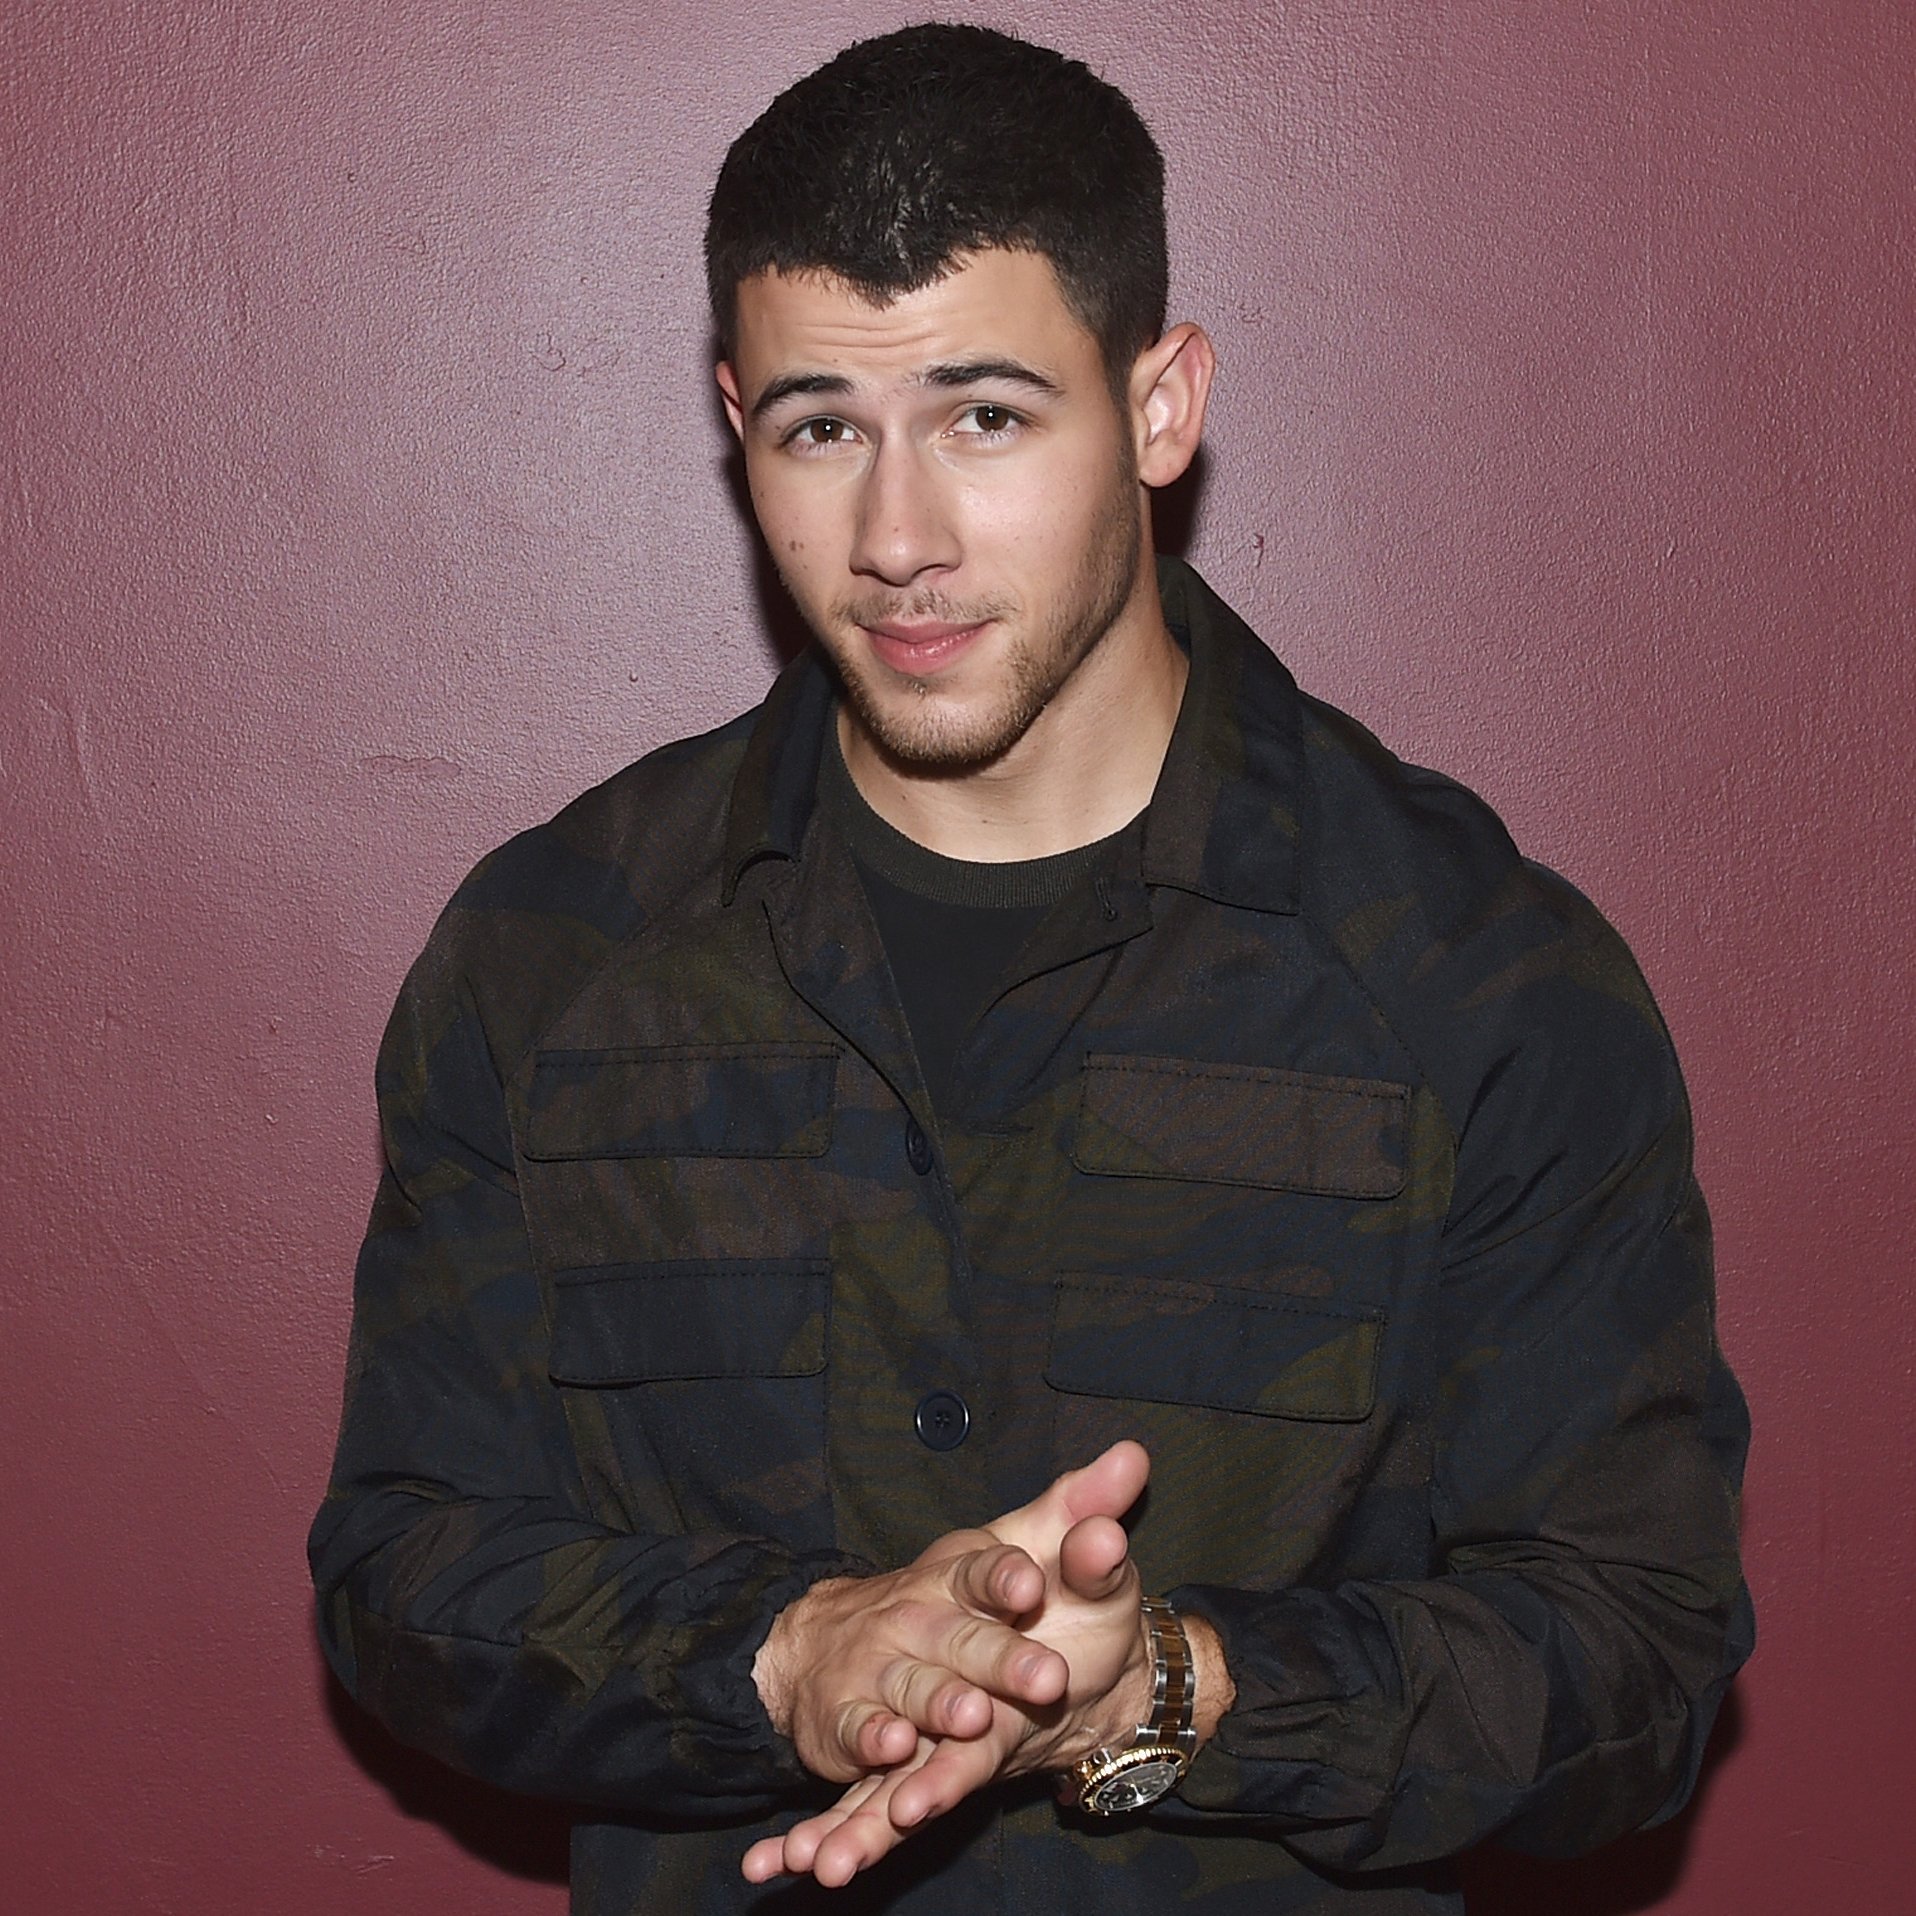 It’s Time to Decide If These Popular Male Celebrities Are Attractive or Not Nick Jonas